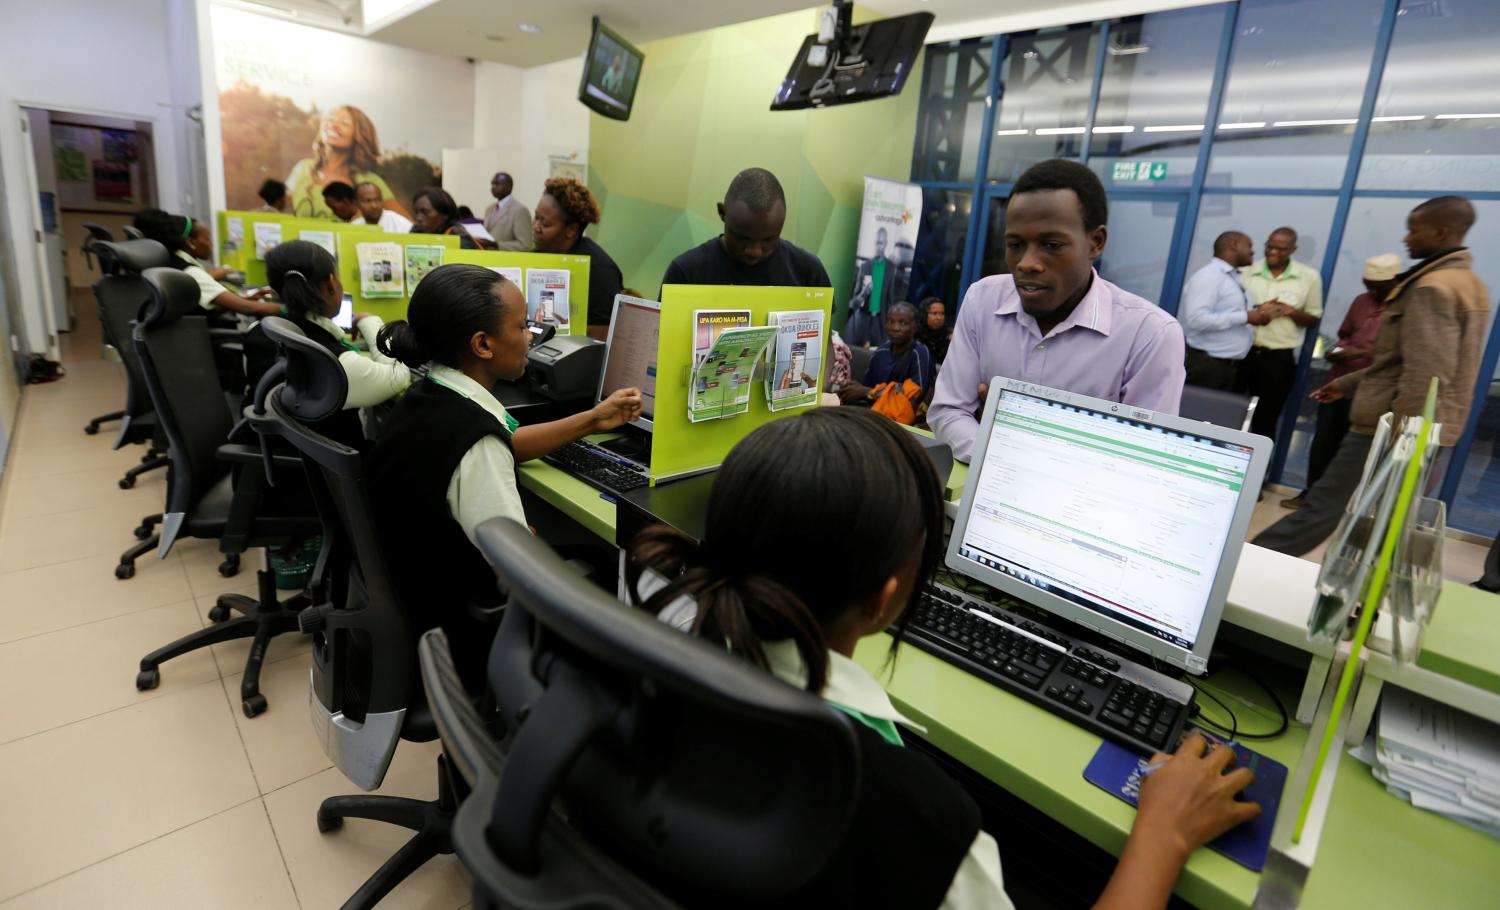 Employees serve customers inside a mobile phone care centre operated by Kenyan's telecom operator Safaricom in the central business district of Kenya's capital Nairobi, May 11, 2016. REUTERS/Thomas Mukoya - D1AETDLLWWAA